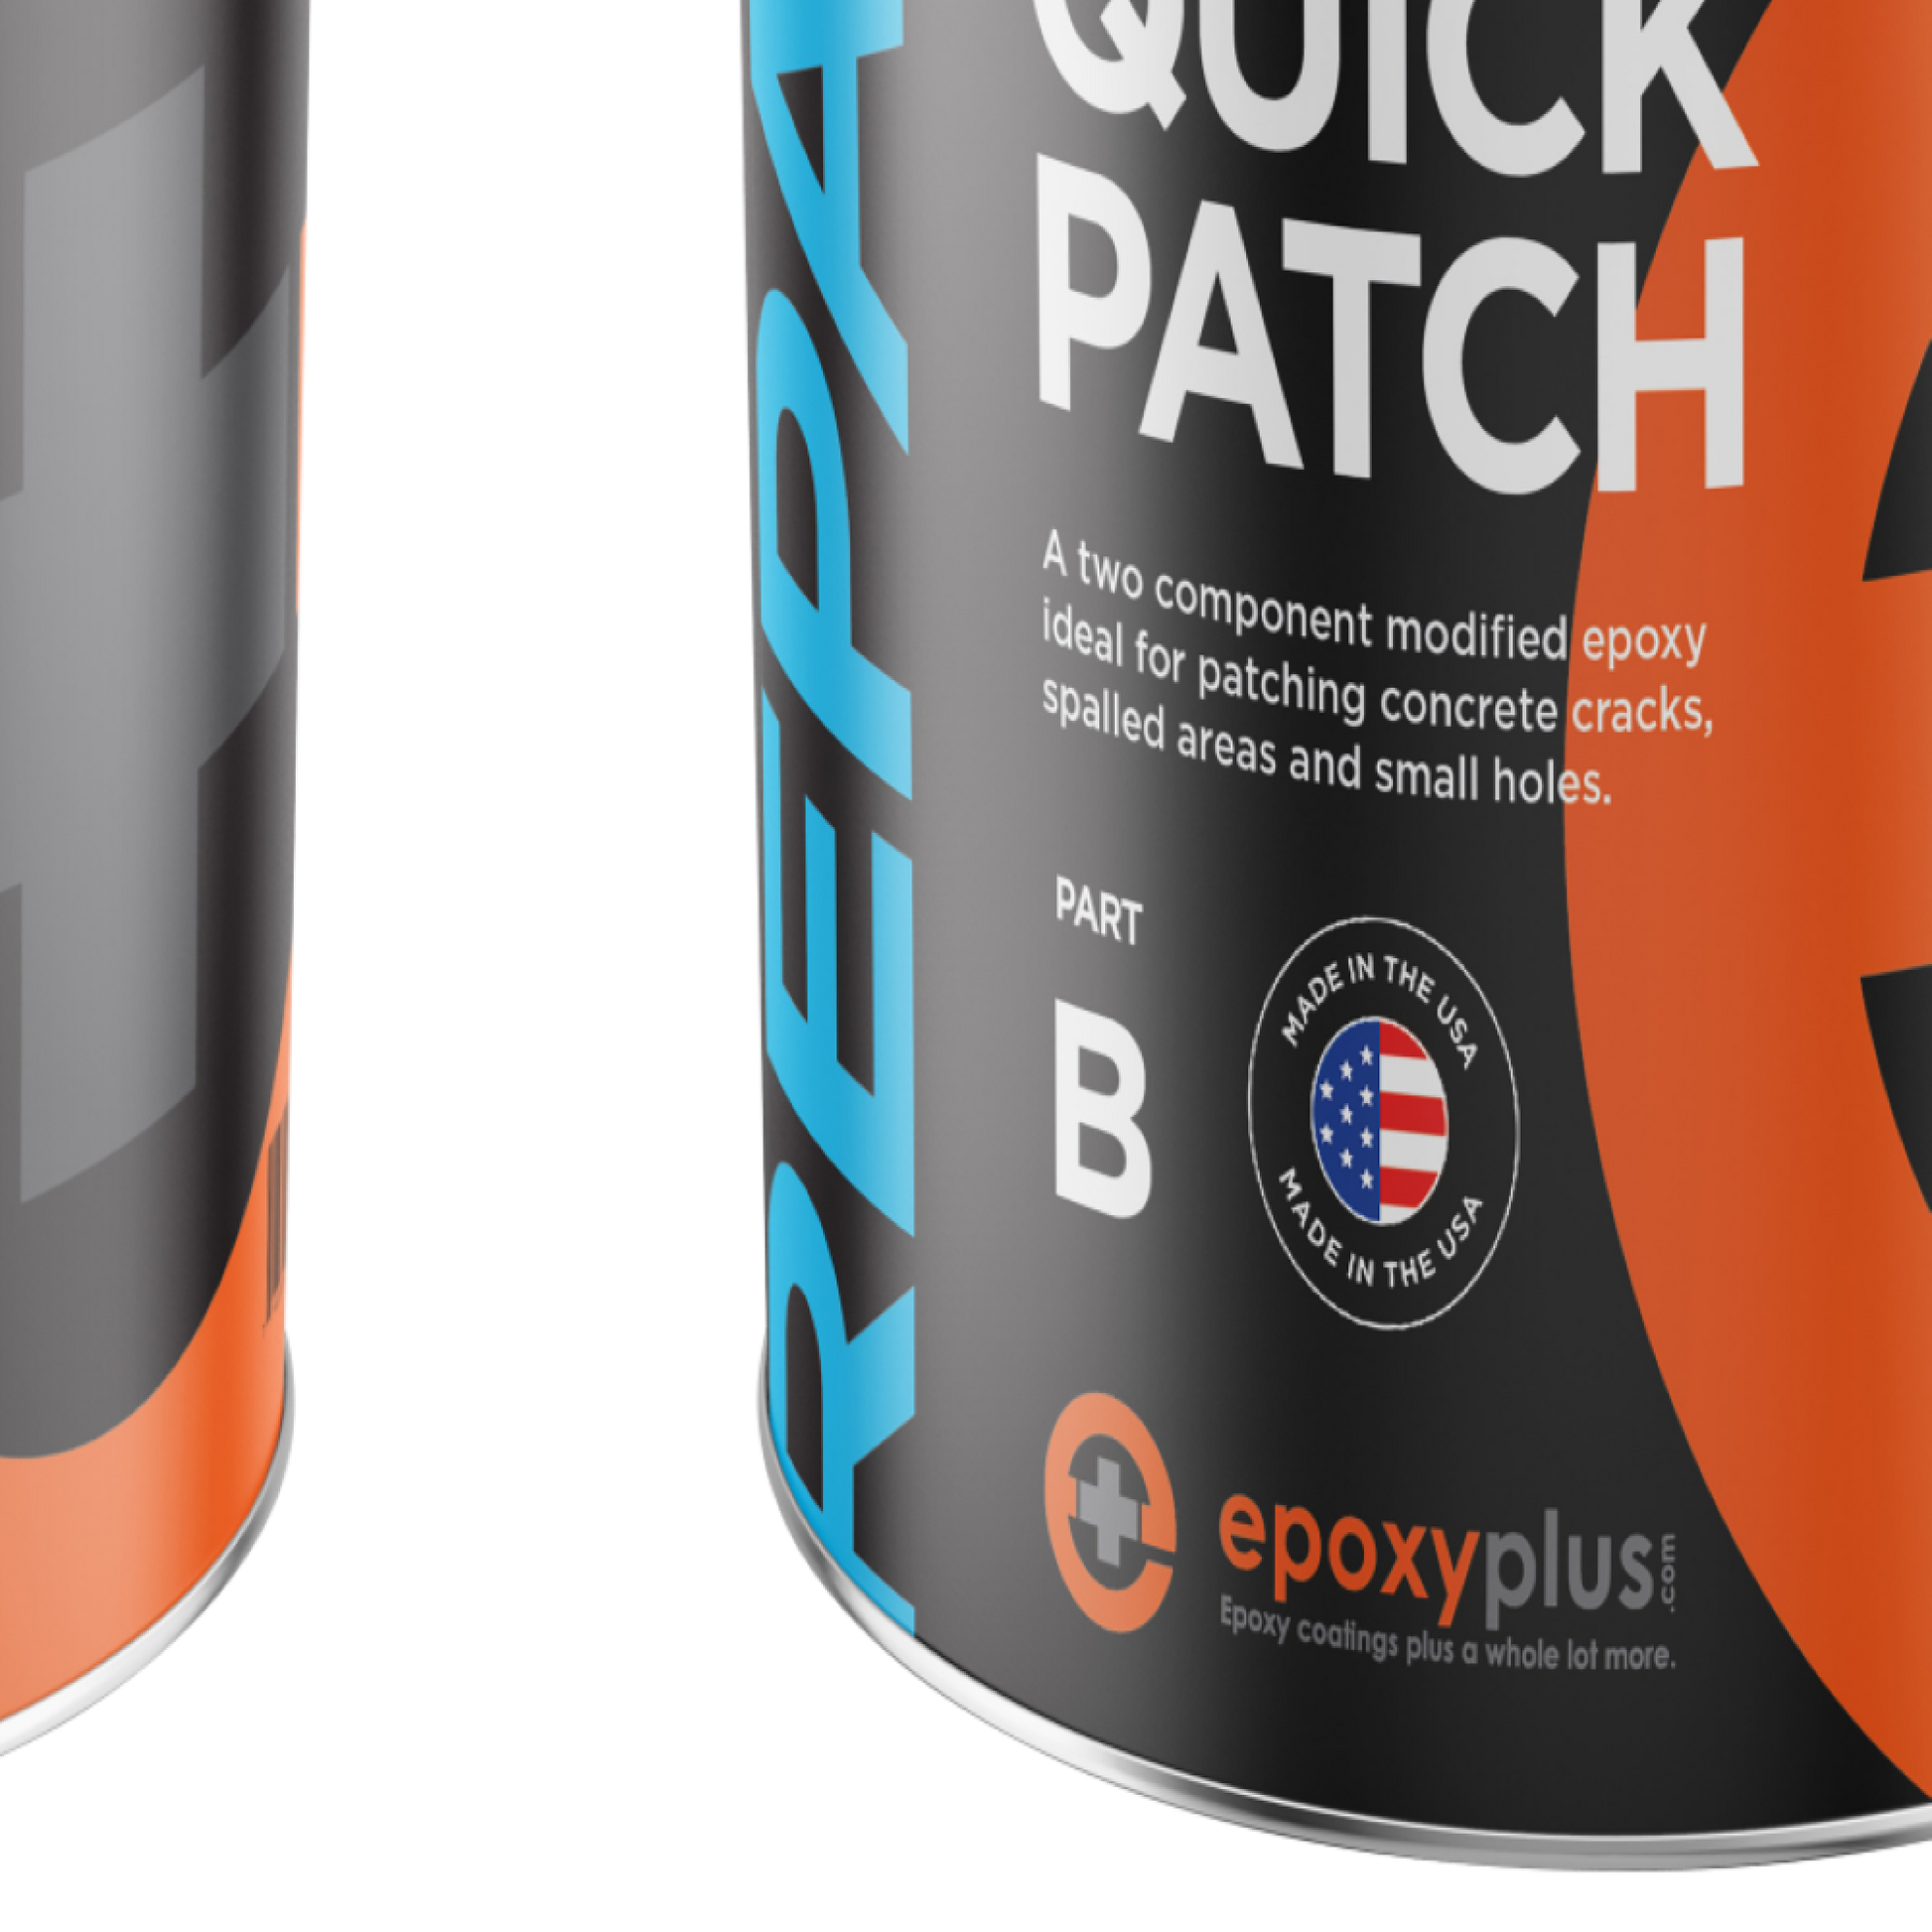 Efficient Repairs: Epoxy Plus Quick Patch - High Load-Bearing Strength for Small Holes